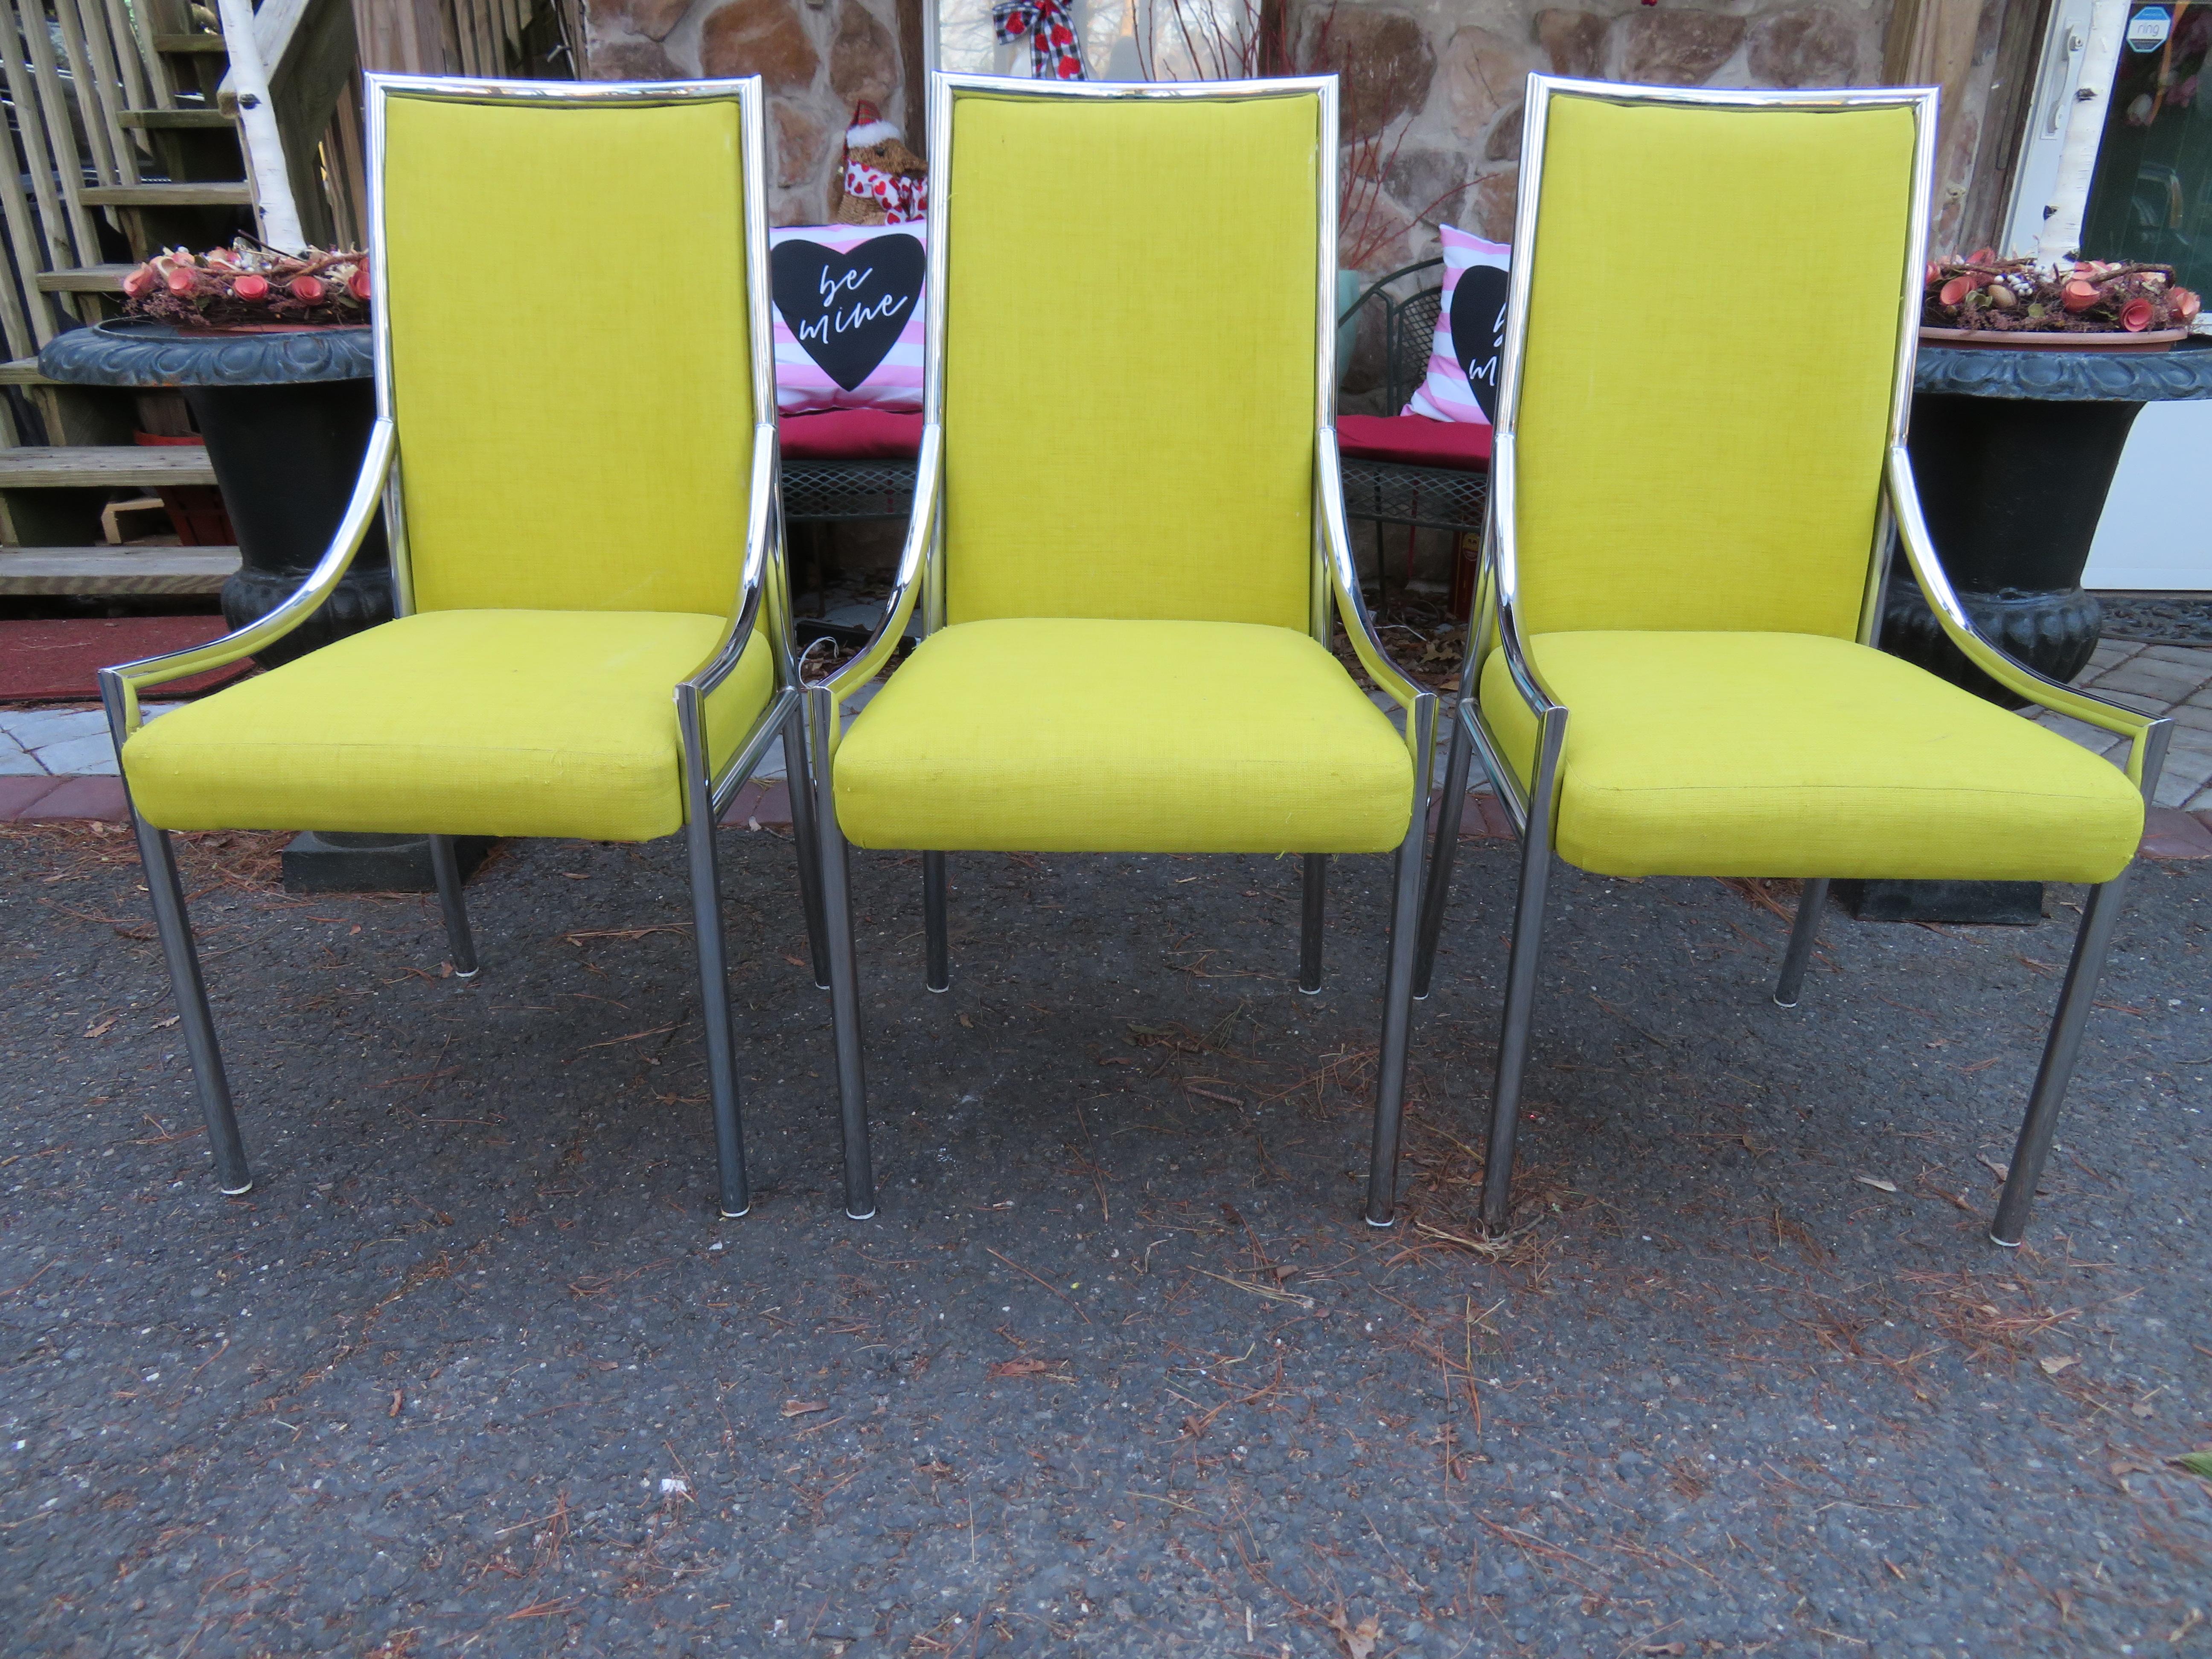 Lovely set of 6 Milo Baughman style chrome dining chairs. We love the rounded chrome tube frames in very nice vintage condition. The upholstery is dated and worn and will need to be reupholstered but we love the original sunny yellow color. These